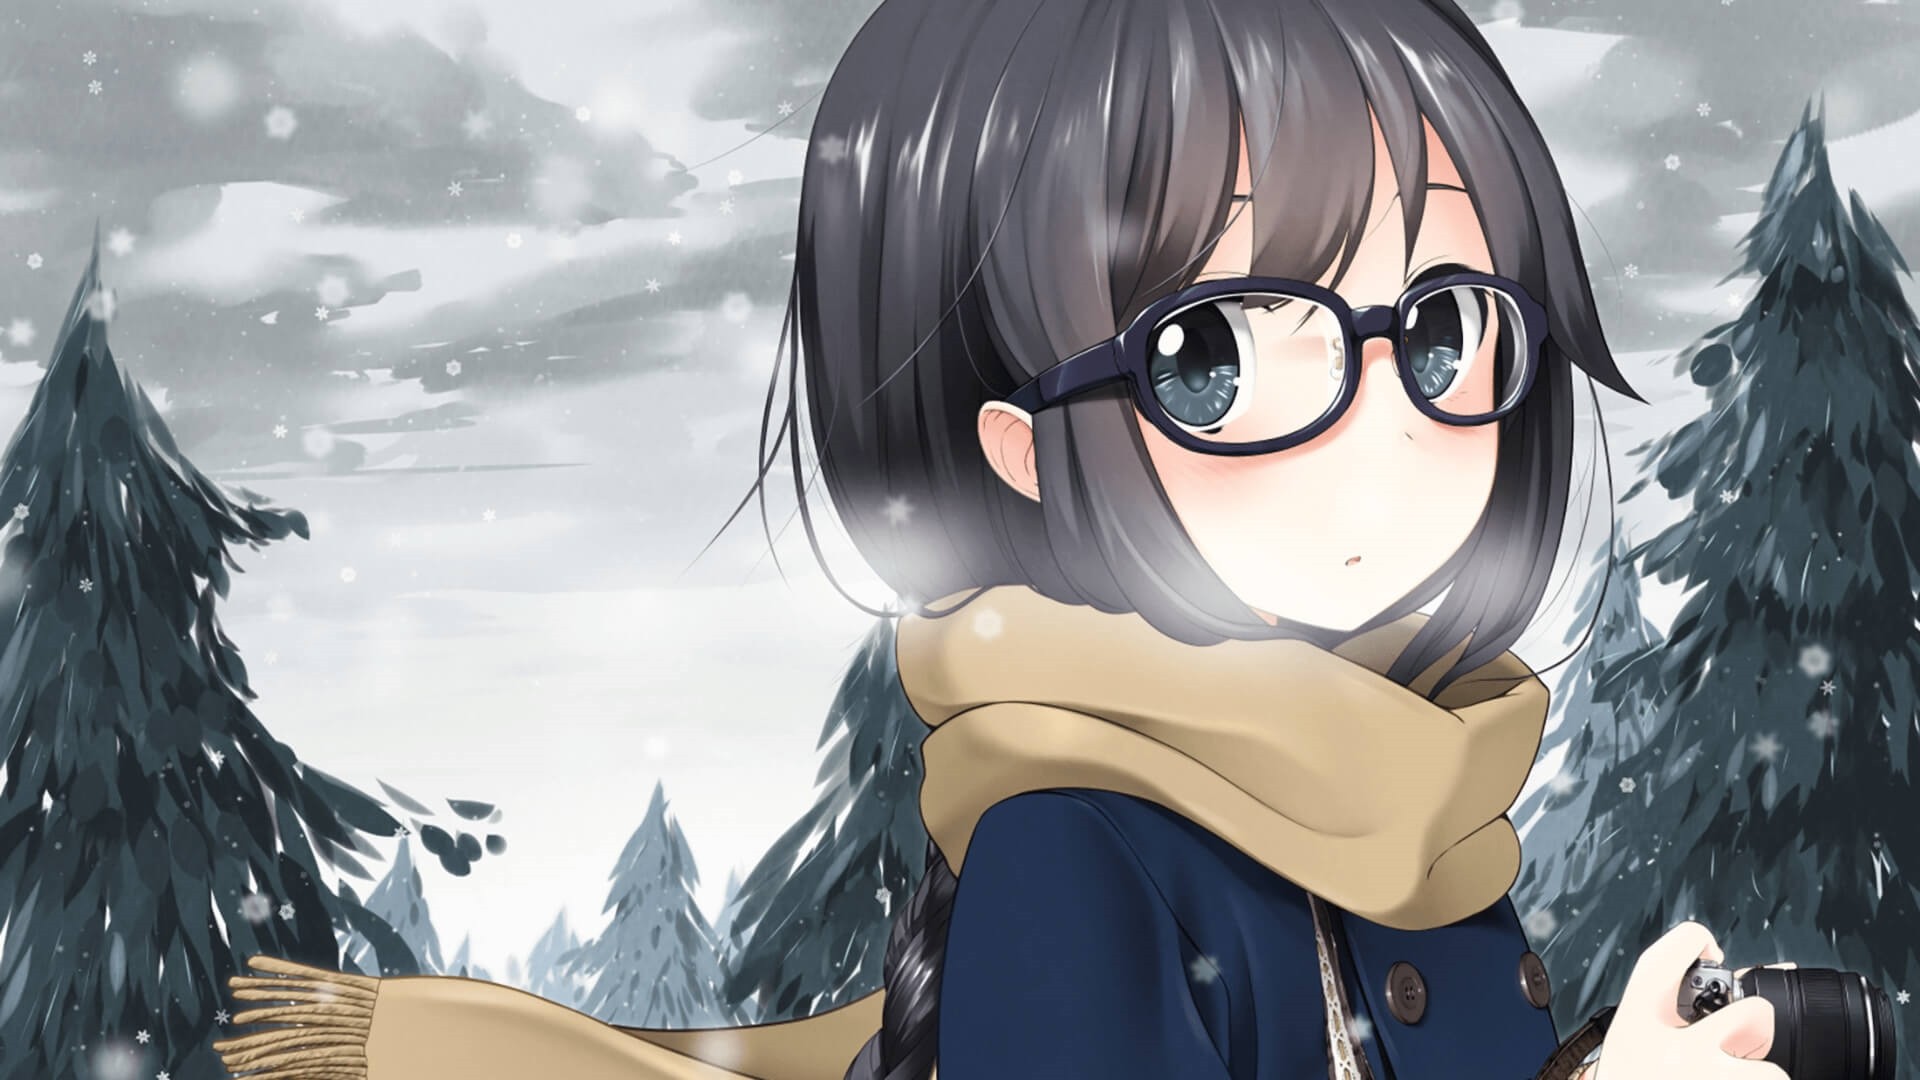 Anime Girl With Glasses wallpaper photo hd